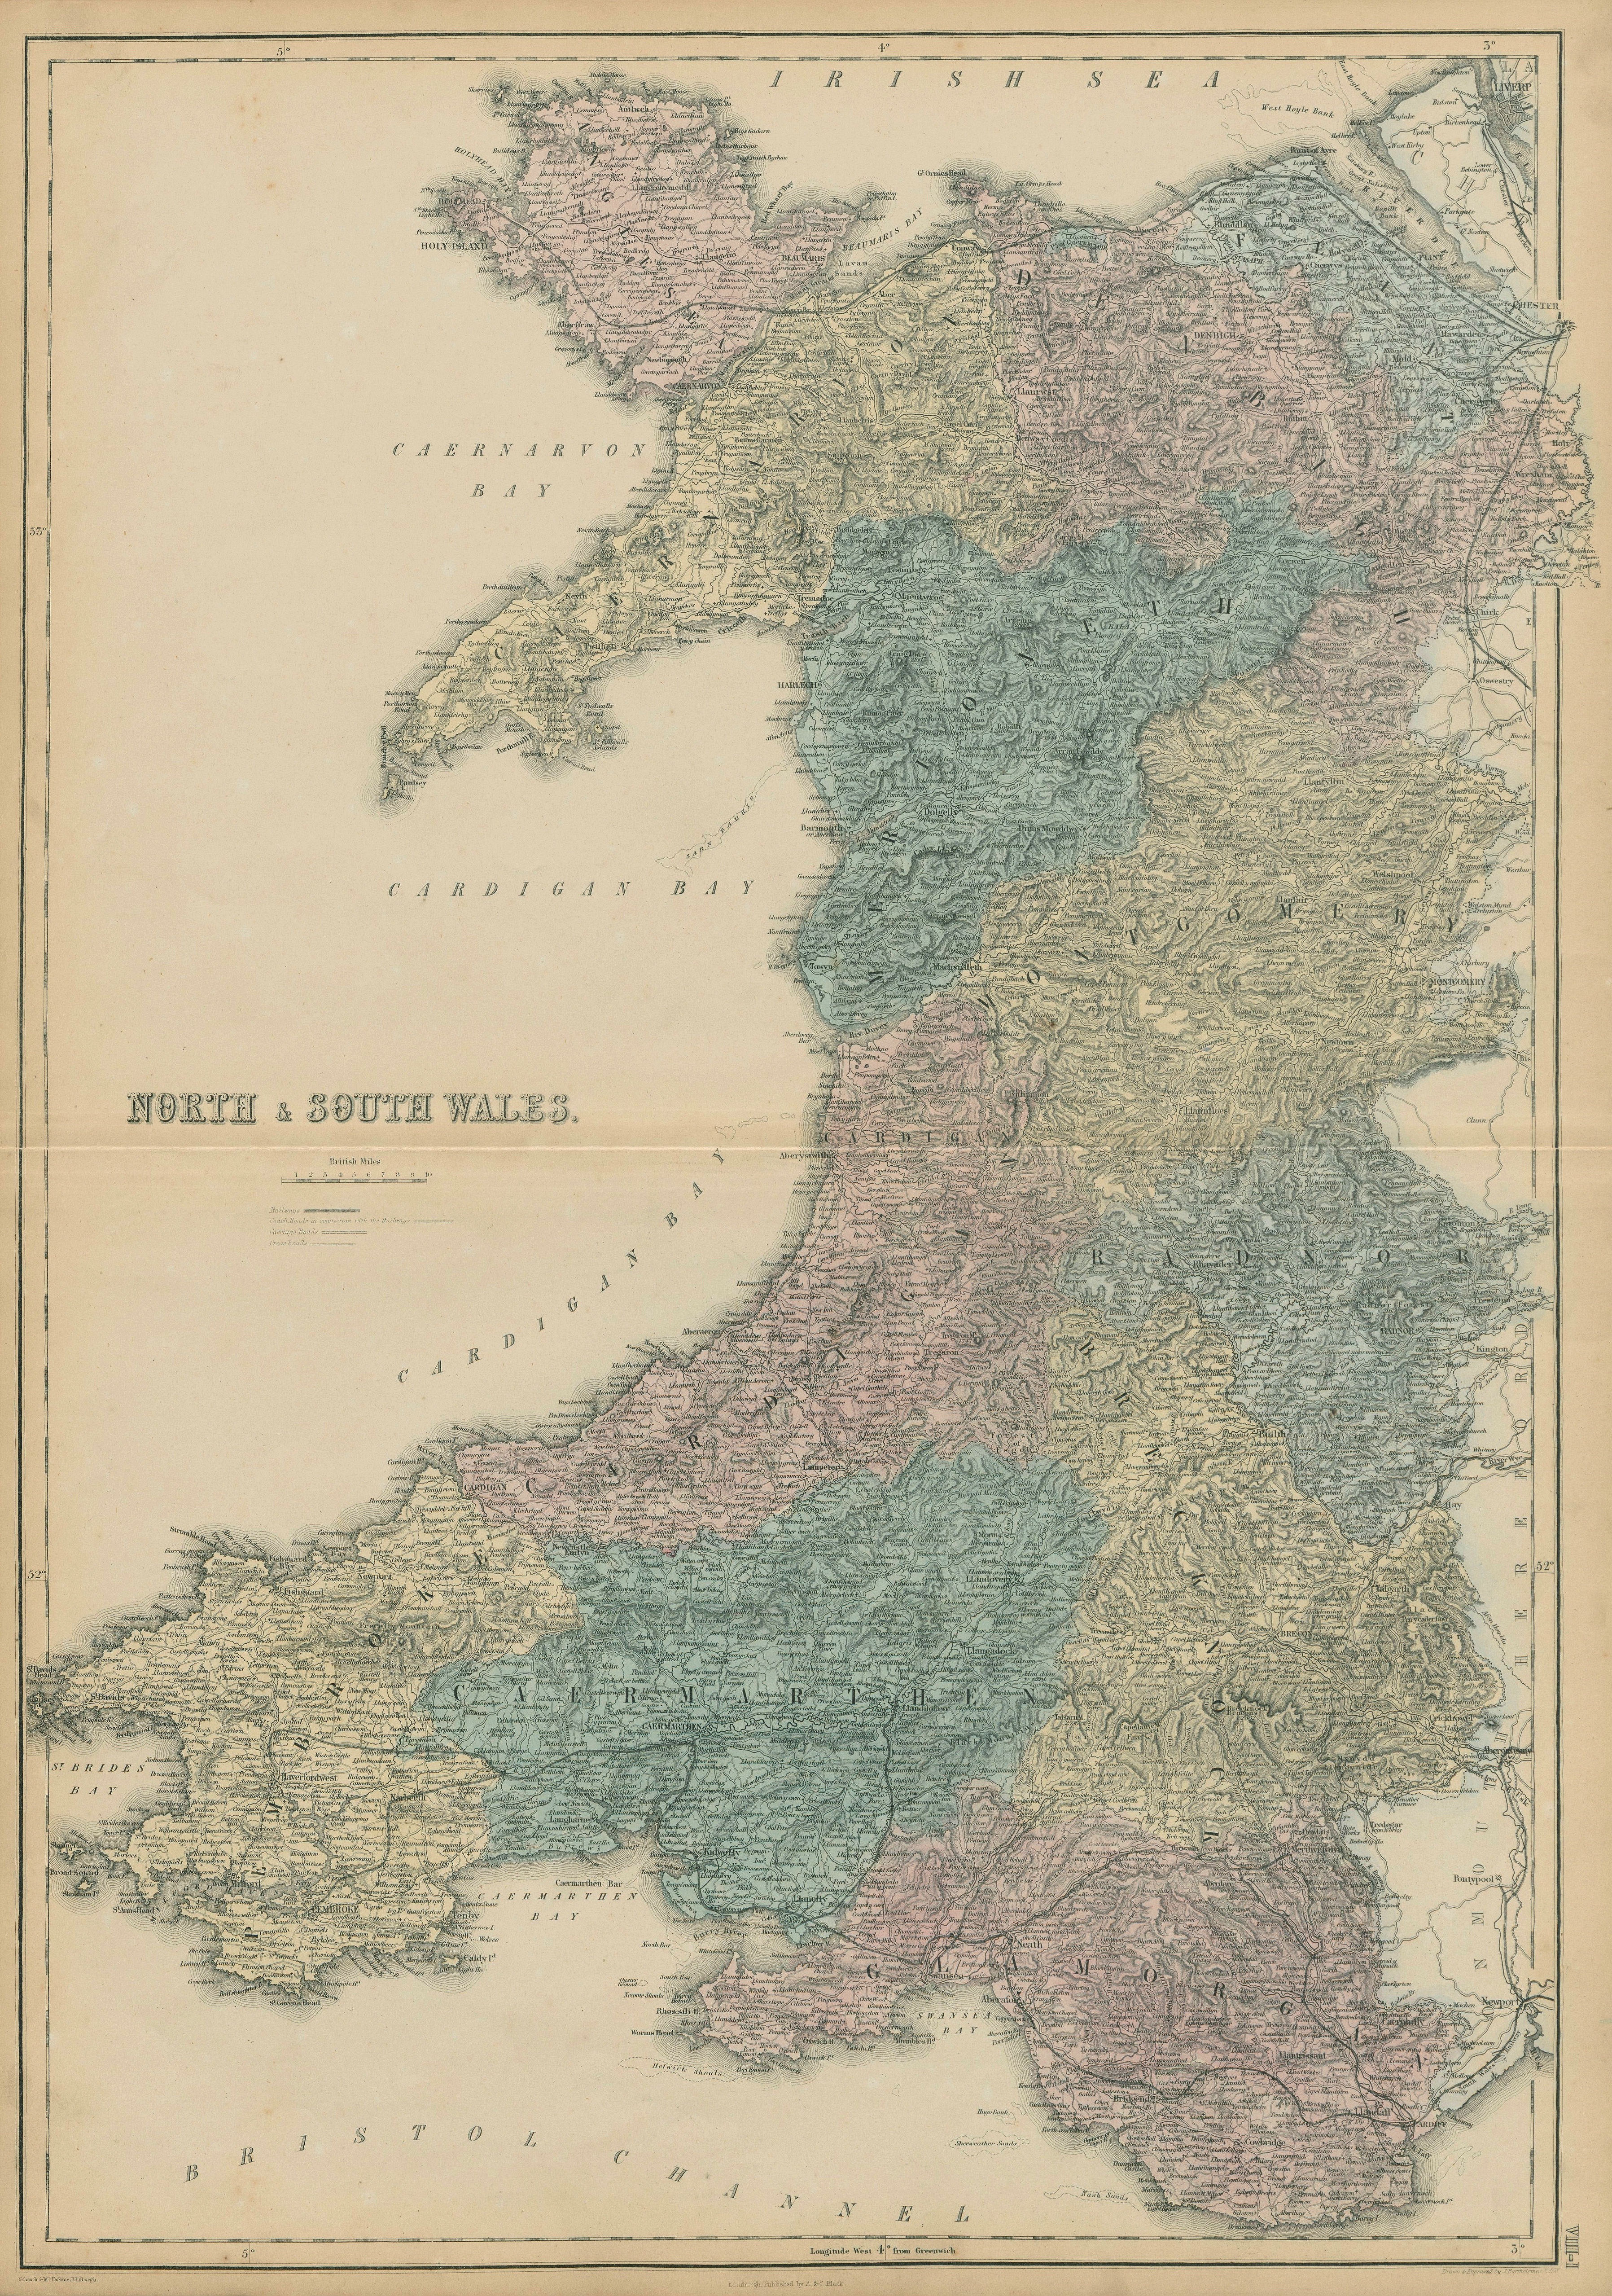 North & South Wales. Counties. SIDNEY HALL 1856 old antique map plan chart